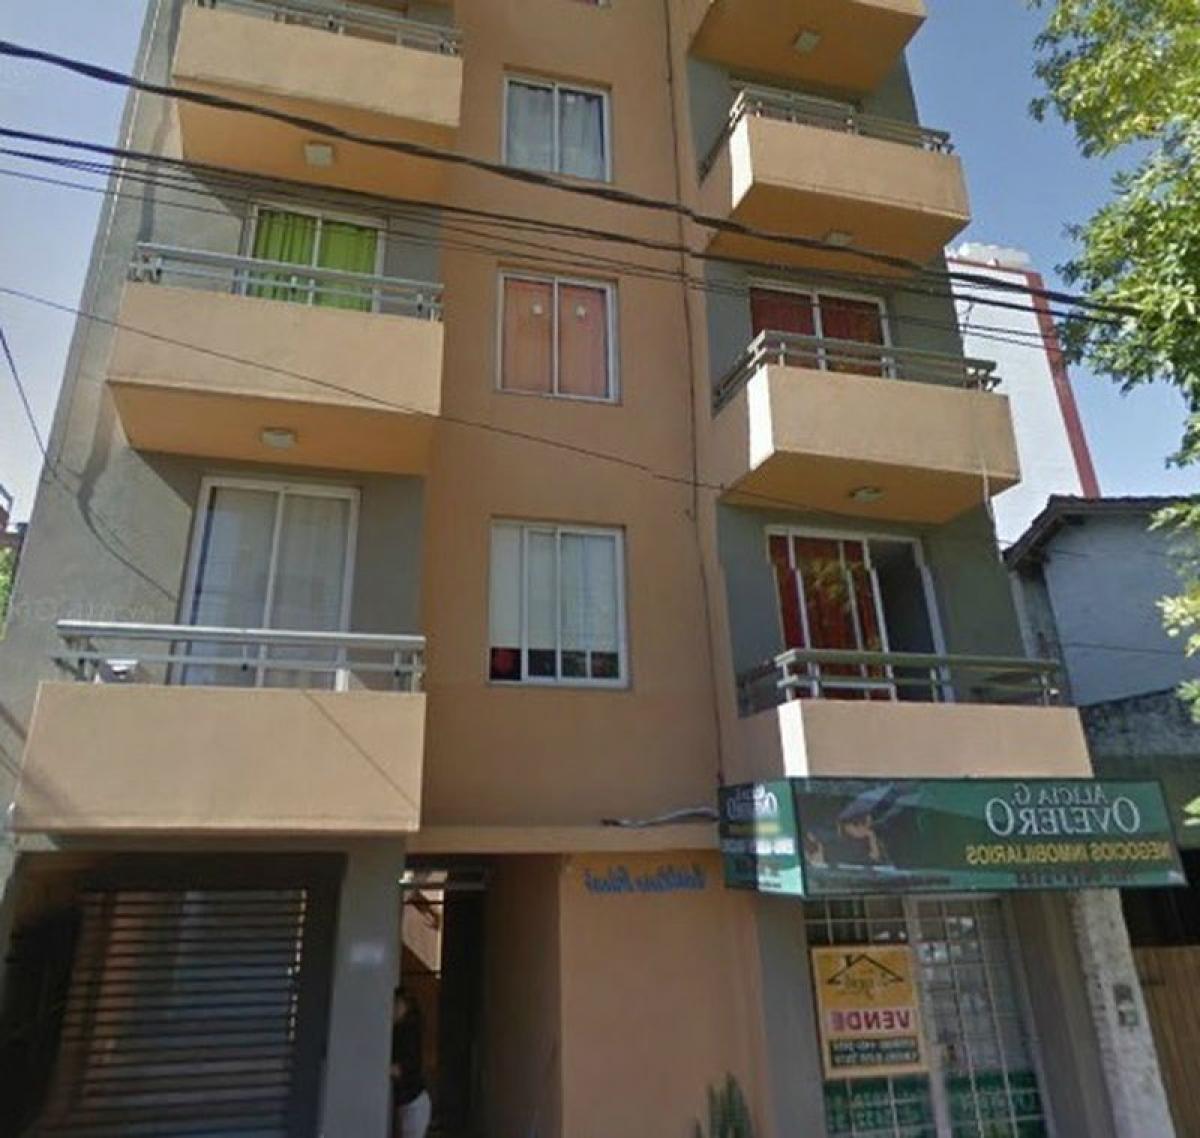 Picture of Apartment For Sale in Bs.As. G.B.A. Zona Norte, Buenos Aires, Argentina